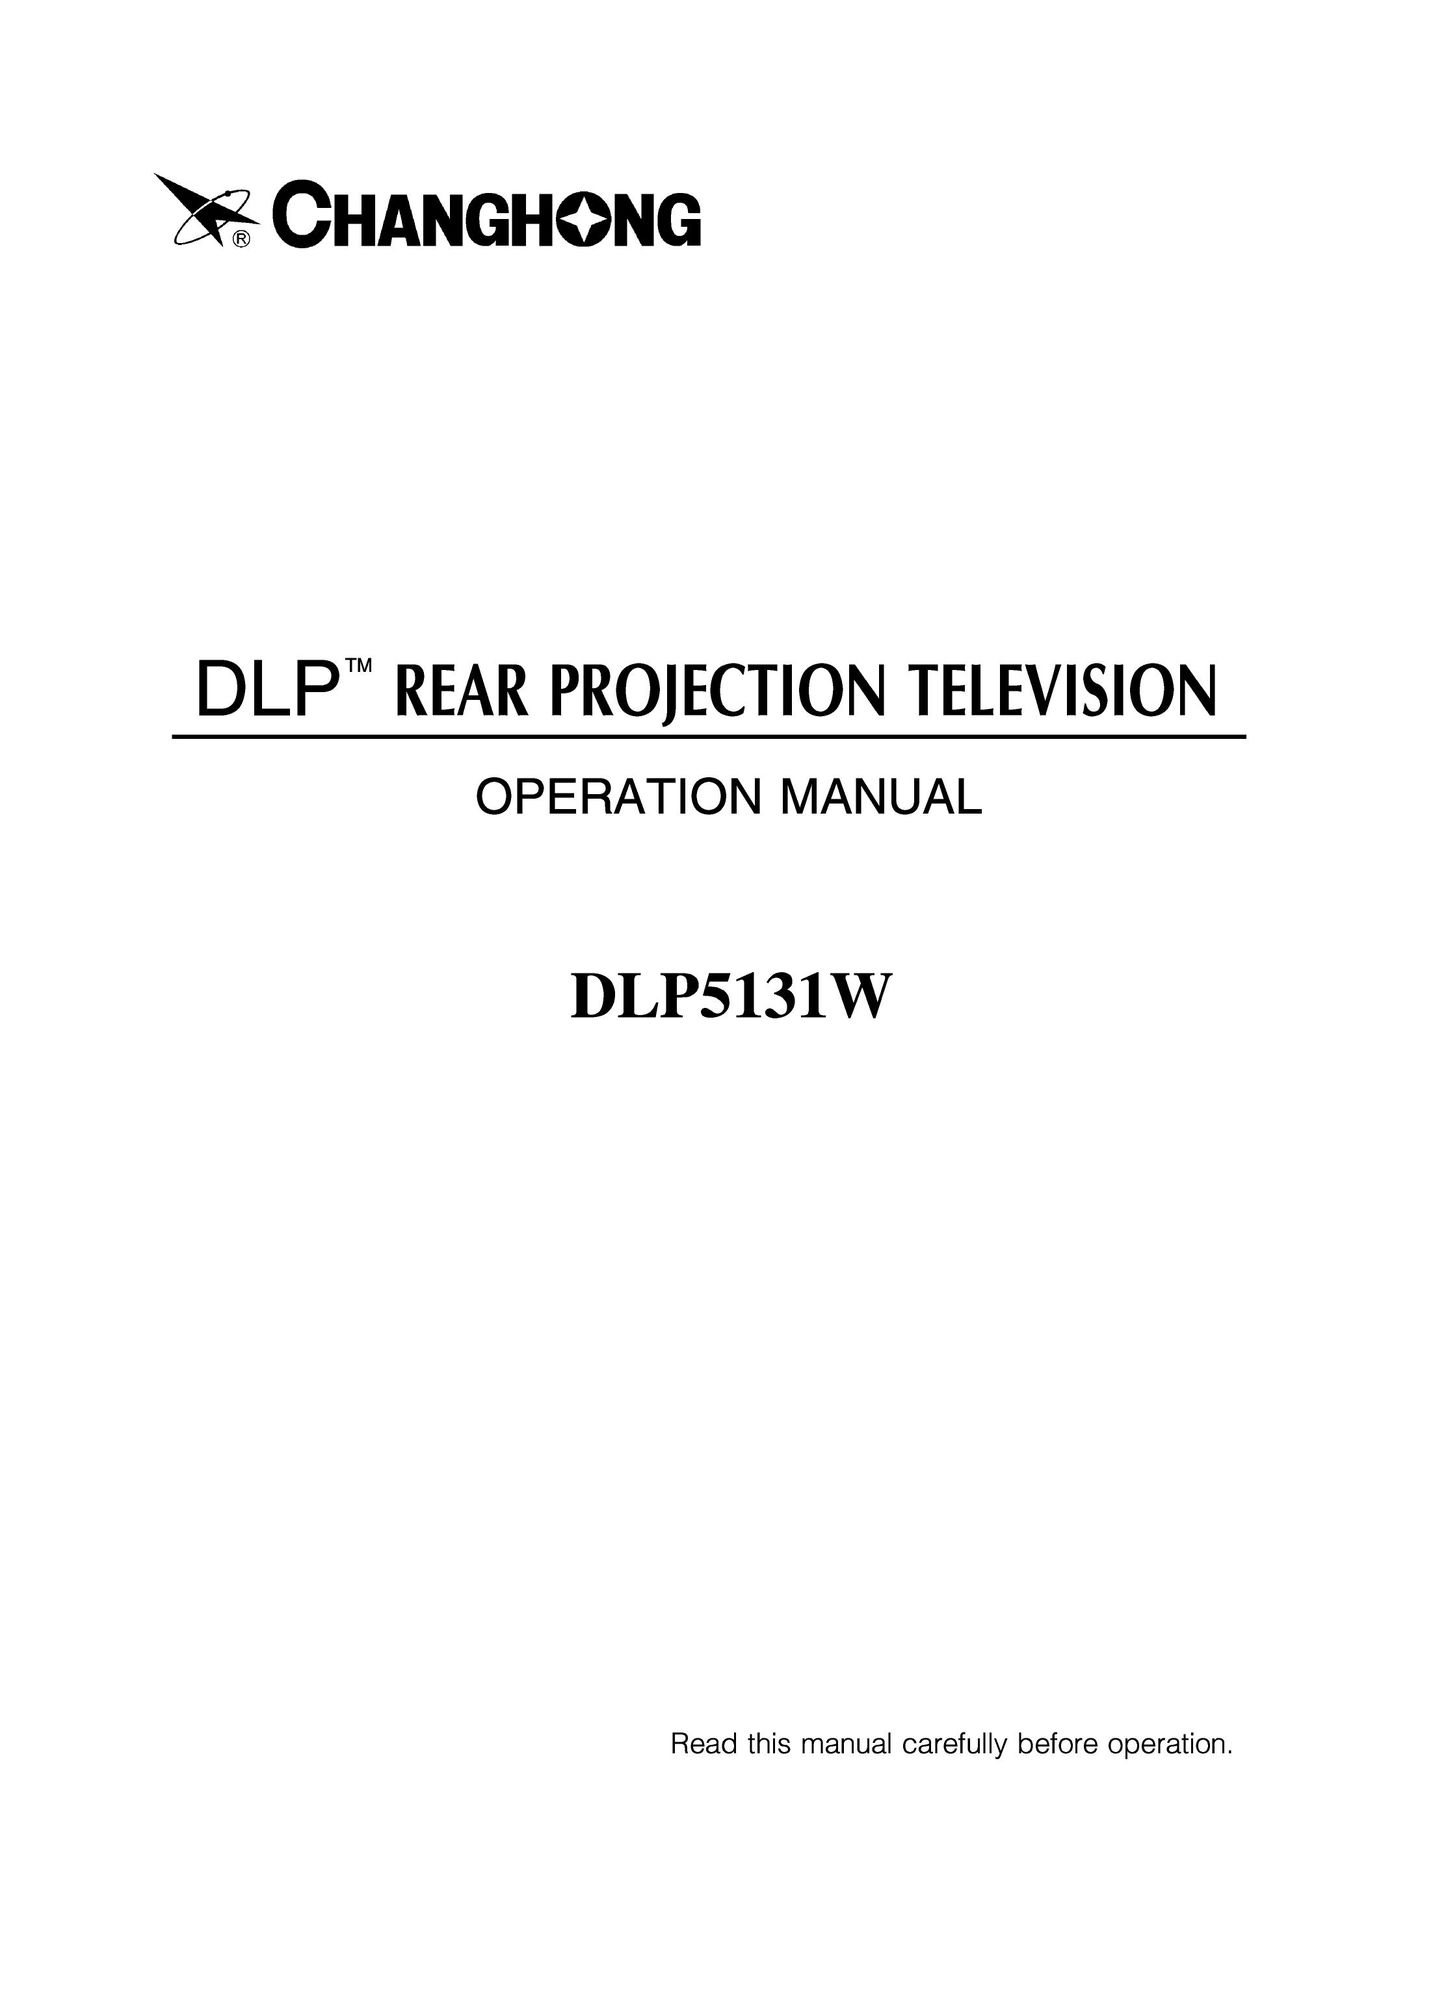 Changhong Electric DLP5131W Projection Television User Manual